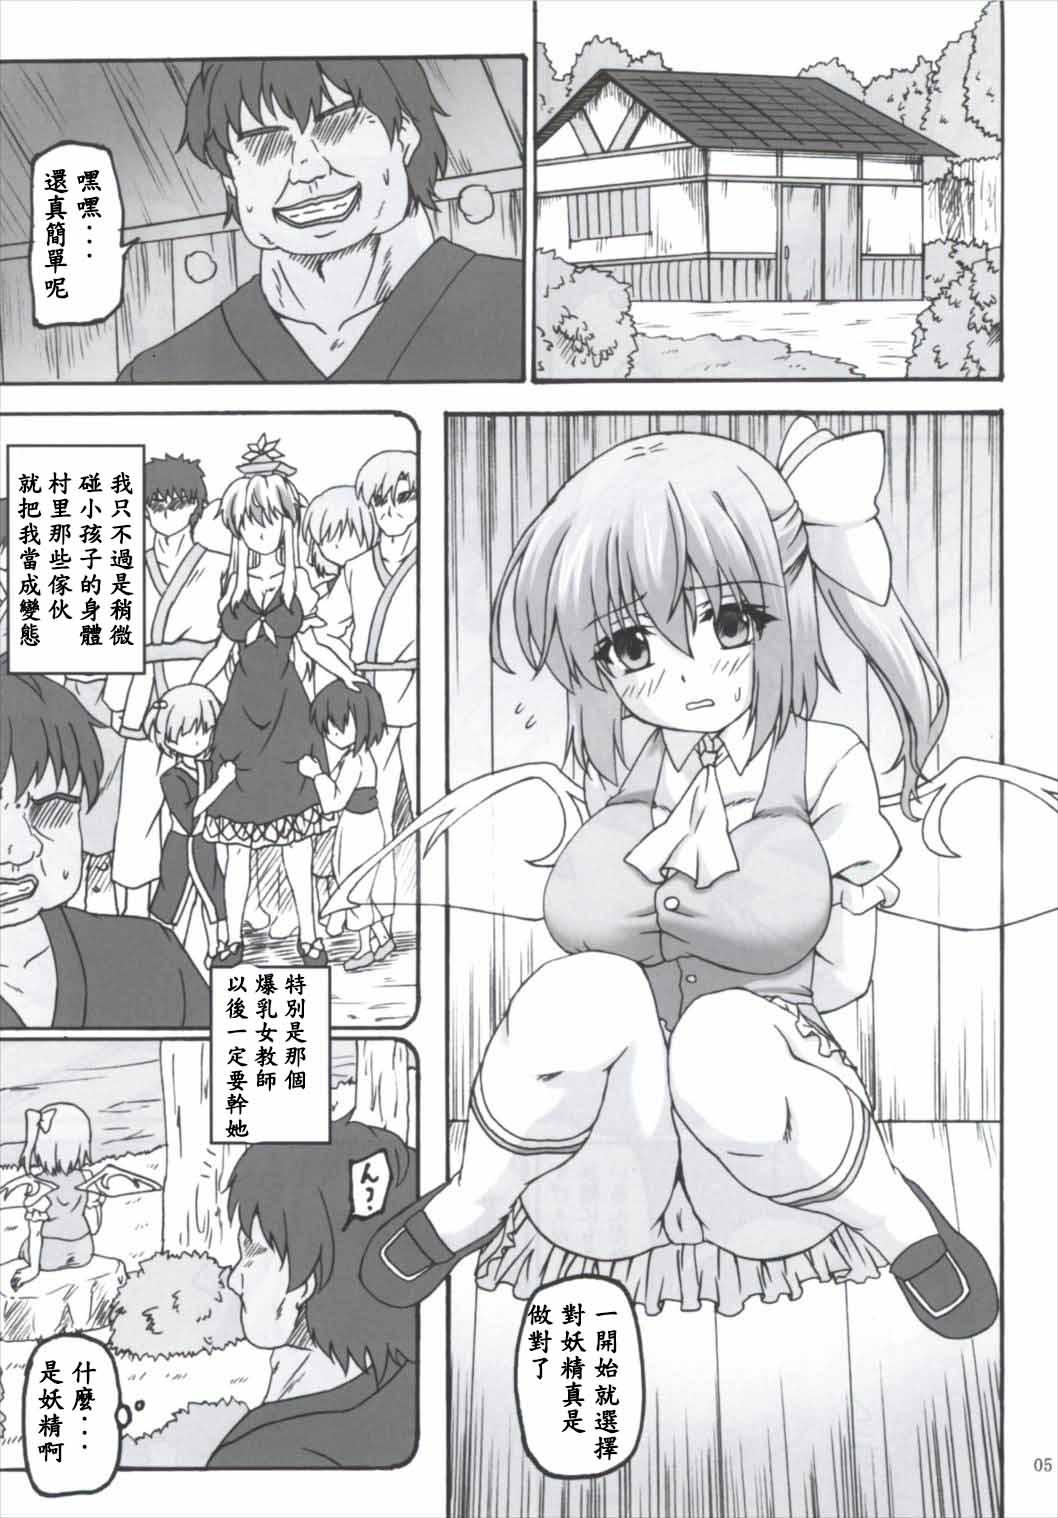 Hotporn Daiyousei Hyouhon - Touhou project Amigos - Page 5